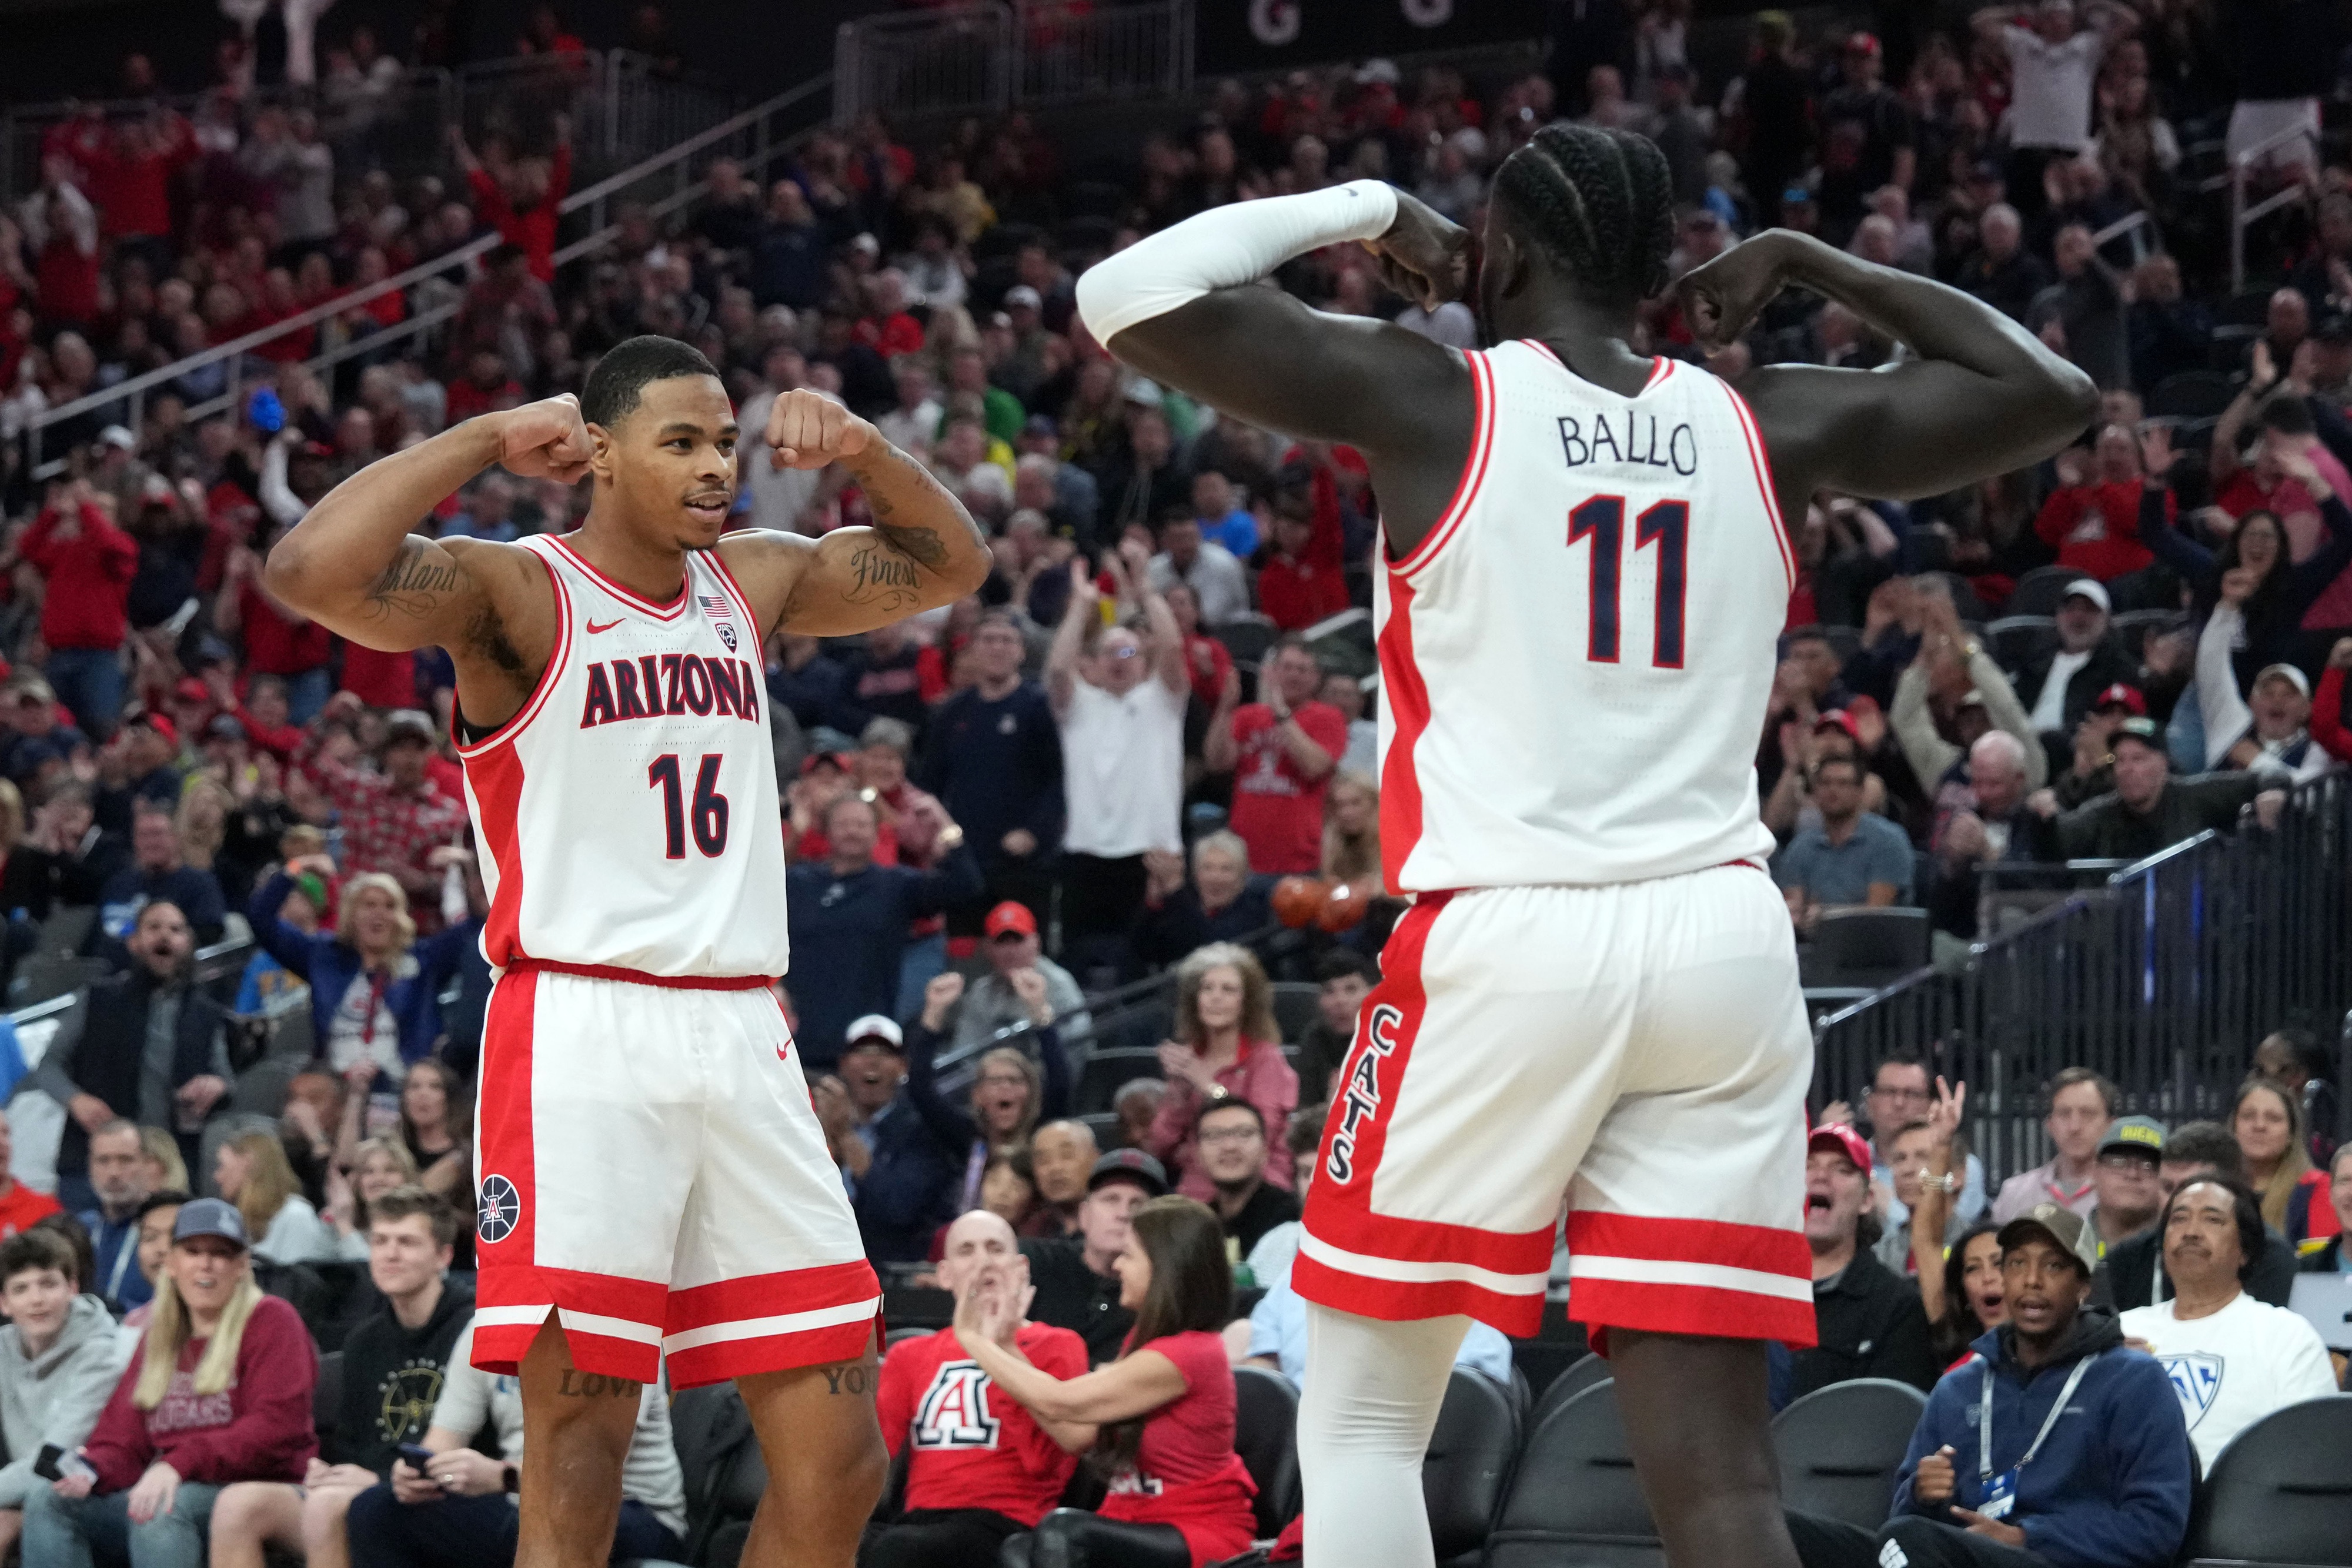 Mar 15, 2024; Las Vegas, NV, USA; Arizona Wildcats center Oumar Ballo (11) and forward Keshad Johnson (16) celebrate in the first half against the Oregon Ducks at T-Mobile Arena.